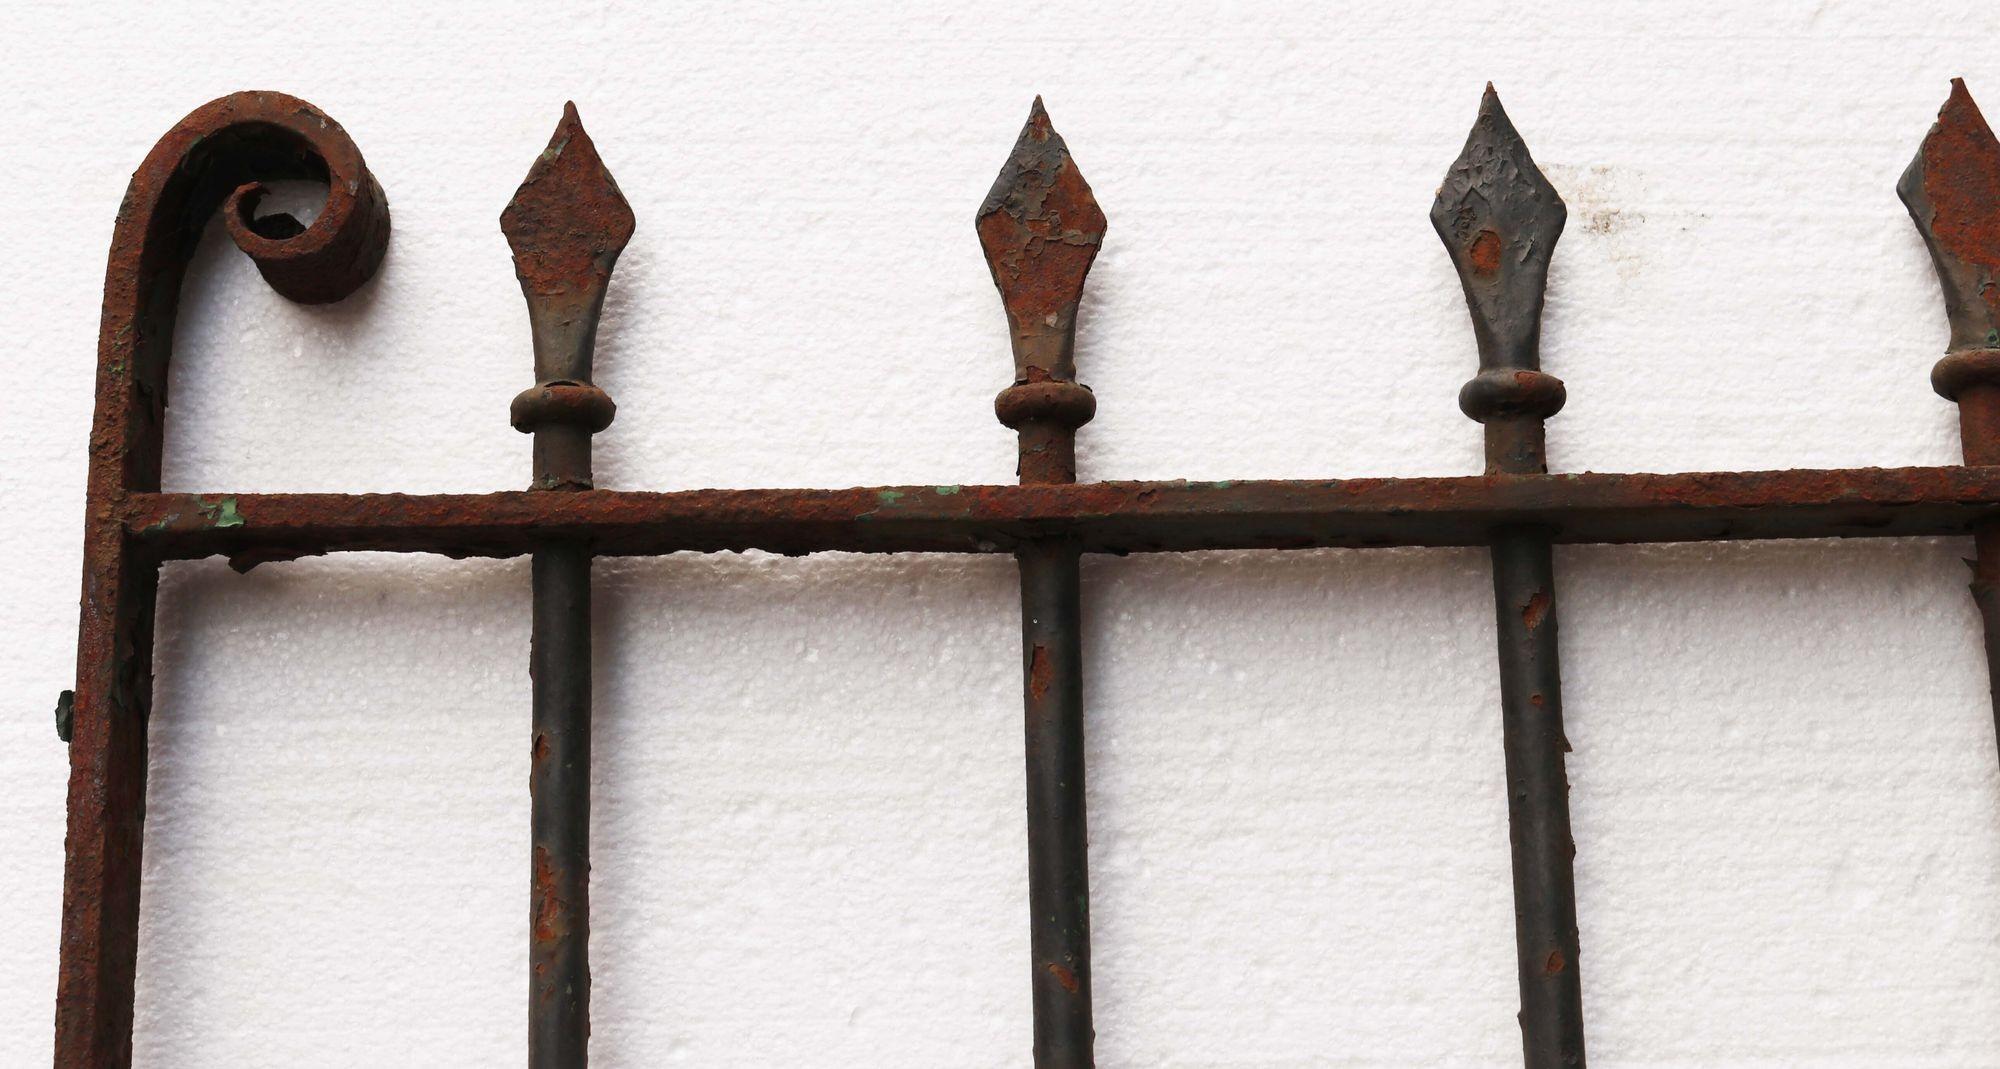 Tall wrought iron side gate. A classical wrought iron side gate with traditional speared finials.
 
Additional dimensions
For an opening of approx. 82 cm.